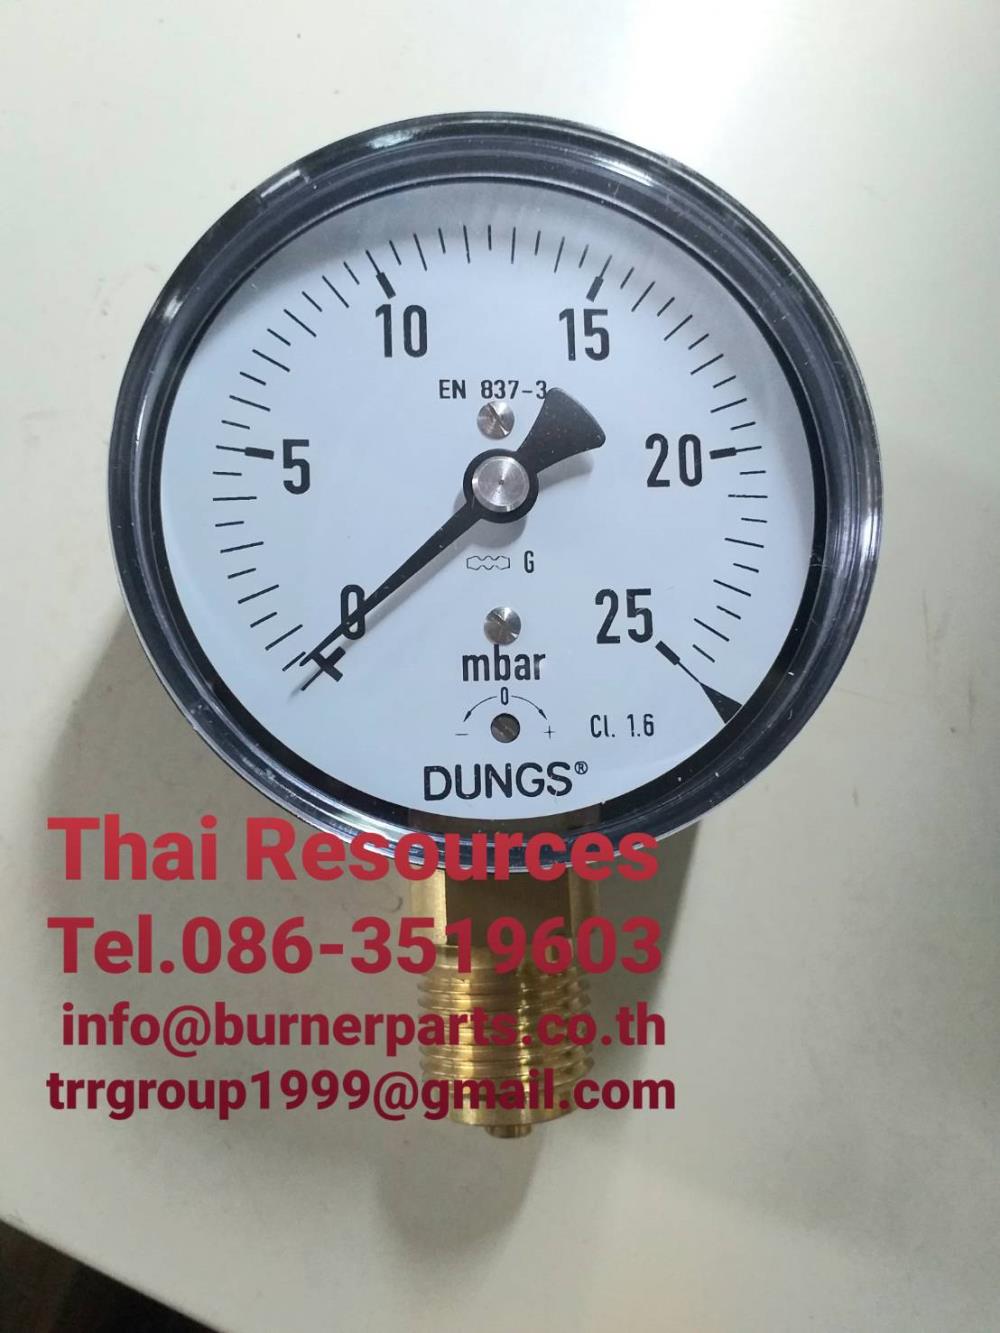 DUNGS Pressure Gauge Range: 0-25 mbar Connections: 1/2"#DUNGS Pressure Gauge Range: 0-4 bar Connections: 1/2",DUNGS Pressure Gauge Range: 0-25 mbar Connections: 1/2"#DUNGS Pressure Gauge Range: 0-4 bar Connections: 1/2",DUNGS Pressure Gauge Range: 0-25 mbar Connections: 1/2"#DUNGS Pressure Gauge Range: 0-4 bar Connections: 1/2",Instruments and Controls/Gauges